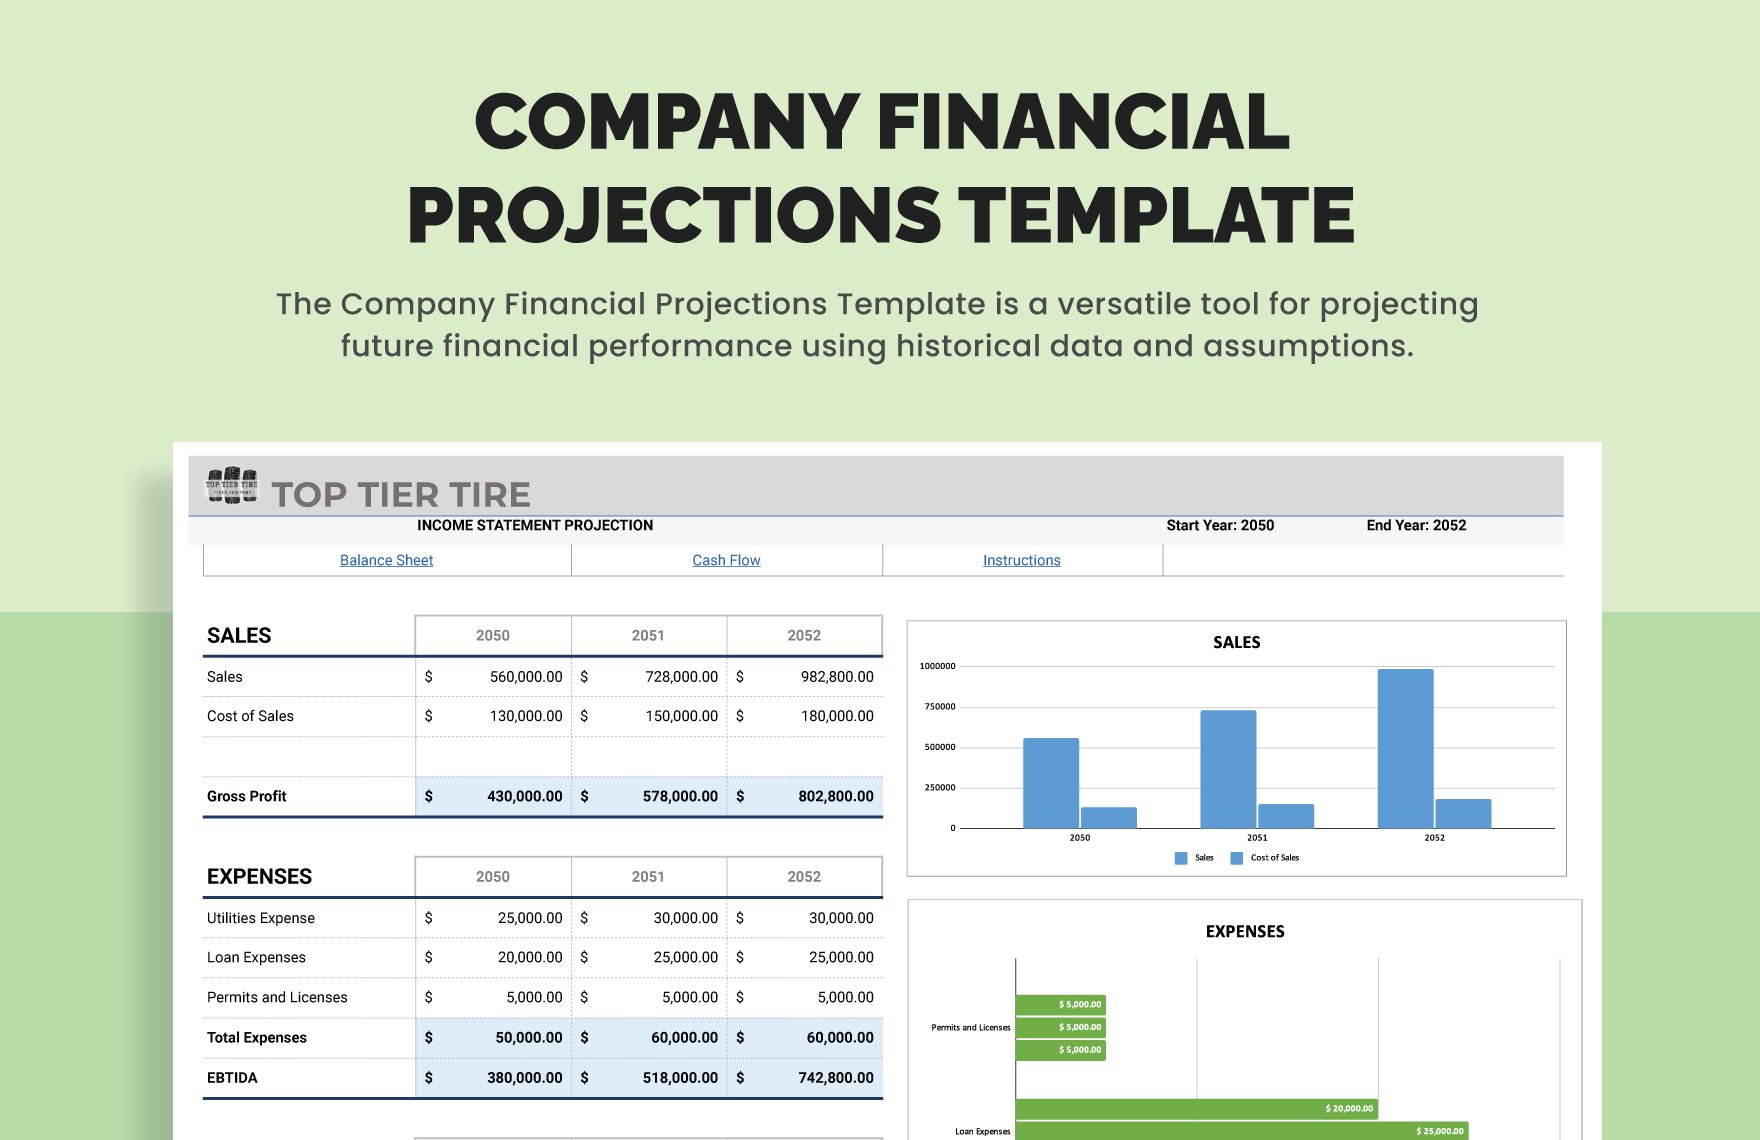 Company Financial Projections Template in Excel, Google Sheets